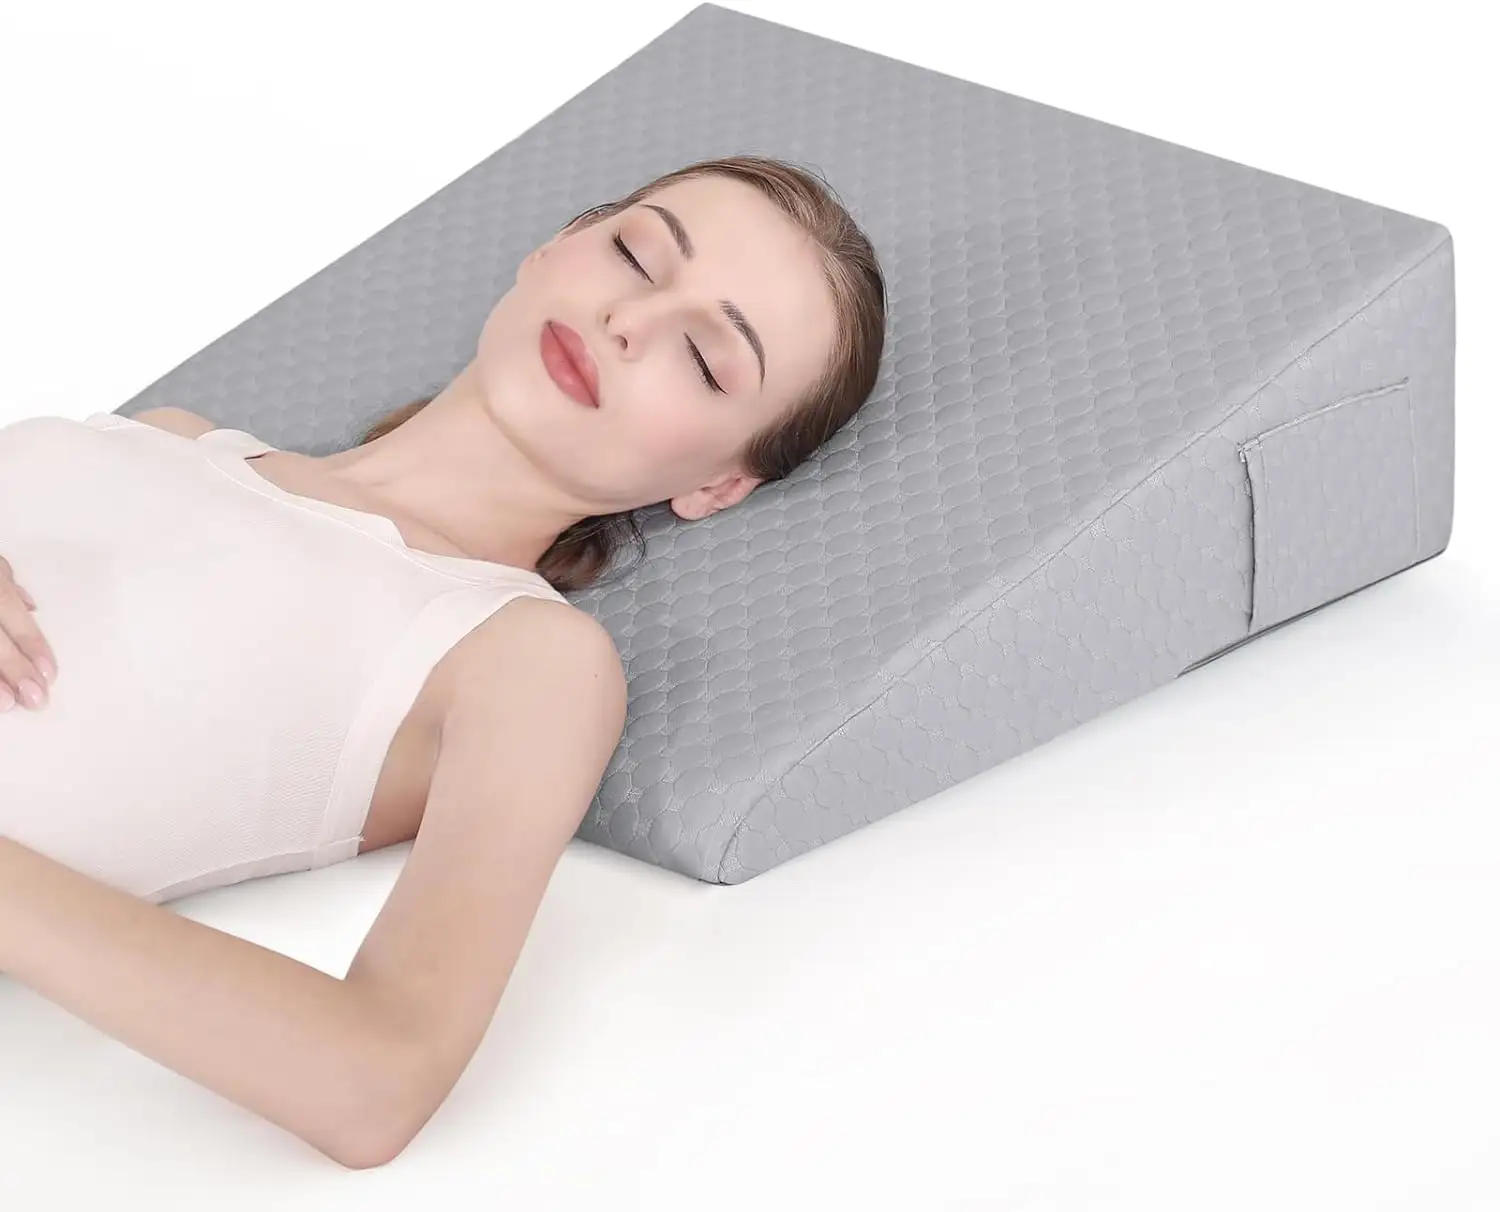 Bed Wedge Pillow for Sleeping 7.5" Memory Foam Wedge Pillow with Removable Washable Cover